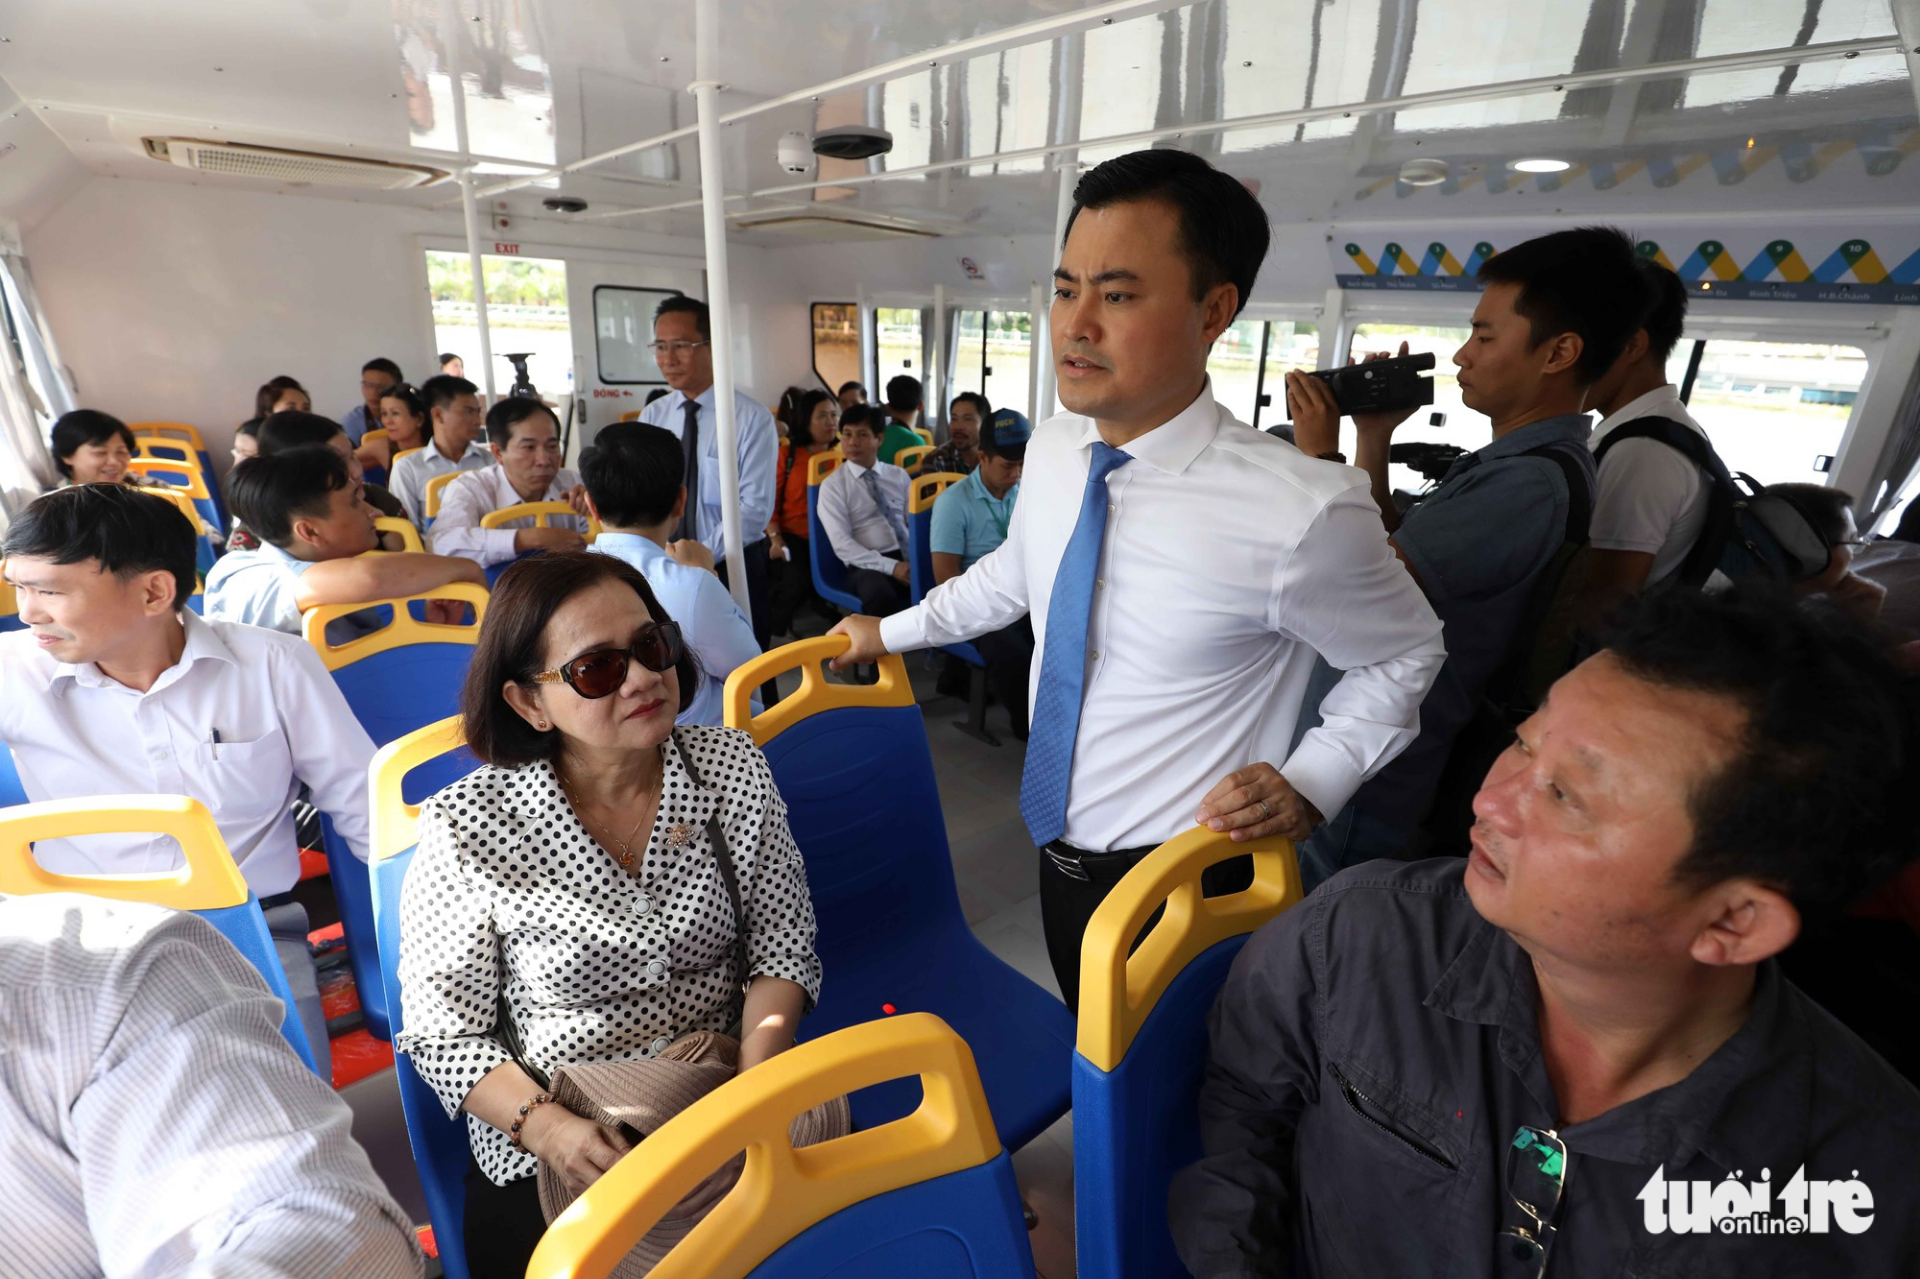 Bui Xuan Cuong, director of the Ho Chi Minh City Department of Transport, talks to passenger on the river bus.